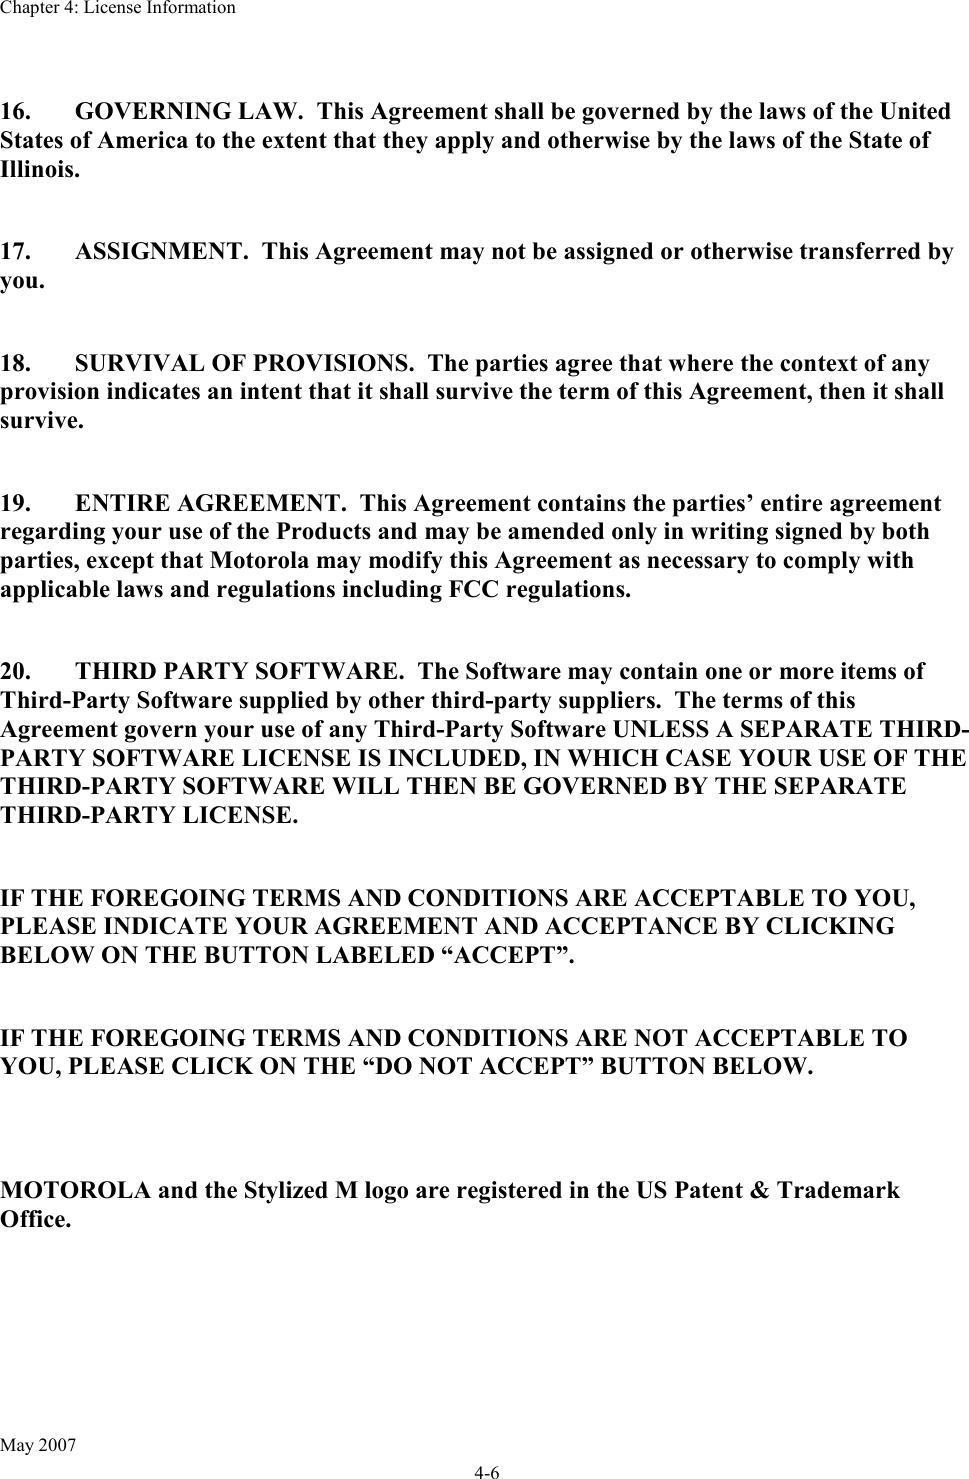 Chapter 4: License Information May 2007 4-6  16.  GOVERNING LAW.  This Agreement shall be governed by the laws of the United States of America to the extent that they apply and otherwise by the laws of the State of Illinois.  17.  ASSIGNMENT.  This Agreement may not be assigned or otherwise transferred by you.  18.  SURVIVAL OF PROVISIONS.  The parties agree that where the context of any provision indicates an intent that it shall survive the term of this Agreement, then it shall survive.  19.  ENTIRE AGREEMENT.  This Agreement contains the parties’ entire agreement regarding your use of the Products and may be amended only in writing signed by both parties, except that Motorola may modify this Agreement as necessary to comply with applicable laws and regulations including FCC regulations.  20.  THIRD PARTY SOFTWARE.  The Software may contain one or more items of Third-Party Software supplied by other third-party suppliers.  The terms of this Agreement govern your use of any Third-Party Software UNLESS A SEPARATE THIRD-PARTY SOFTWARE LICENSE IS INCLUDED, IN WHICH CASE YOUR USE OF THE THIRD-PARTY SOFTWARE WILL THEN BE GOVERNED BY THE SEPARATE THIRD-PARTY LICENSE.  IF THE FOREGOING TERMS AND CONDITIONS ARE ACCEPTABLE TO YOU, PLEASE INDICATE YOUR AGREEMENT AND ACCEPTANCE BY CLICKING BELOW ON THE BUTTON LABELED “ACCEPT”.  IF THE FOREGOING TERMS AND CONDITIONS ARE NOT ACCEPTABLE TO YOU, PLEASE CLICK ON THE “DO NOT ACCEPT” BUTTON BELOW.   MOTOROLA and the Stylized M logo are registered in the US Patent &amp; Trademark Office.    